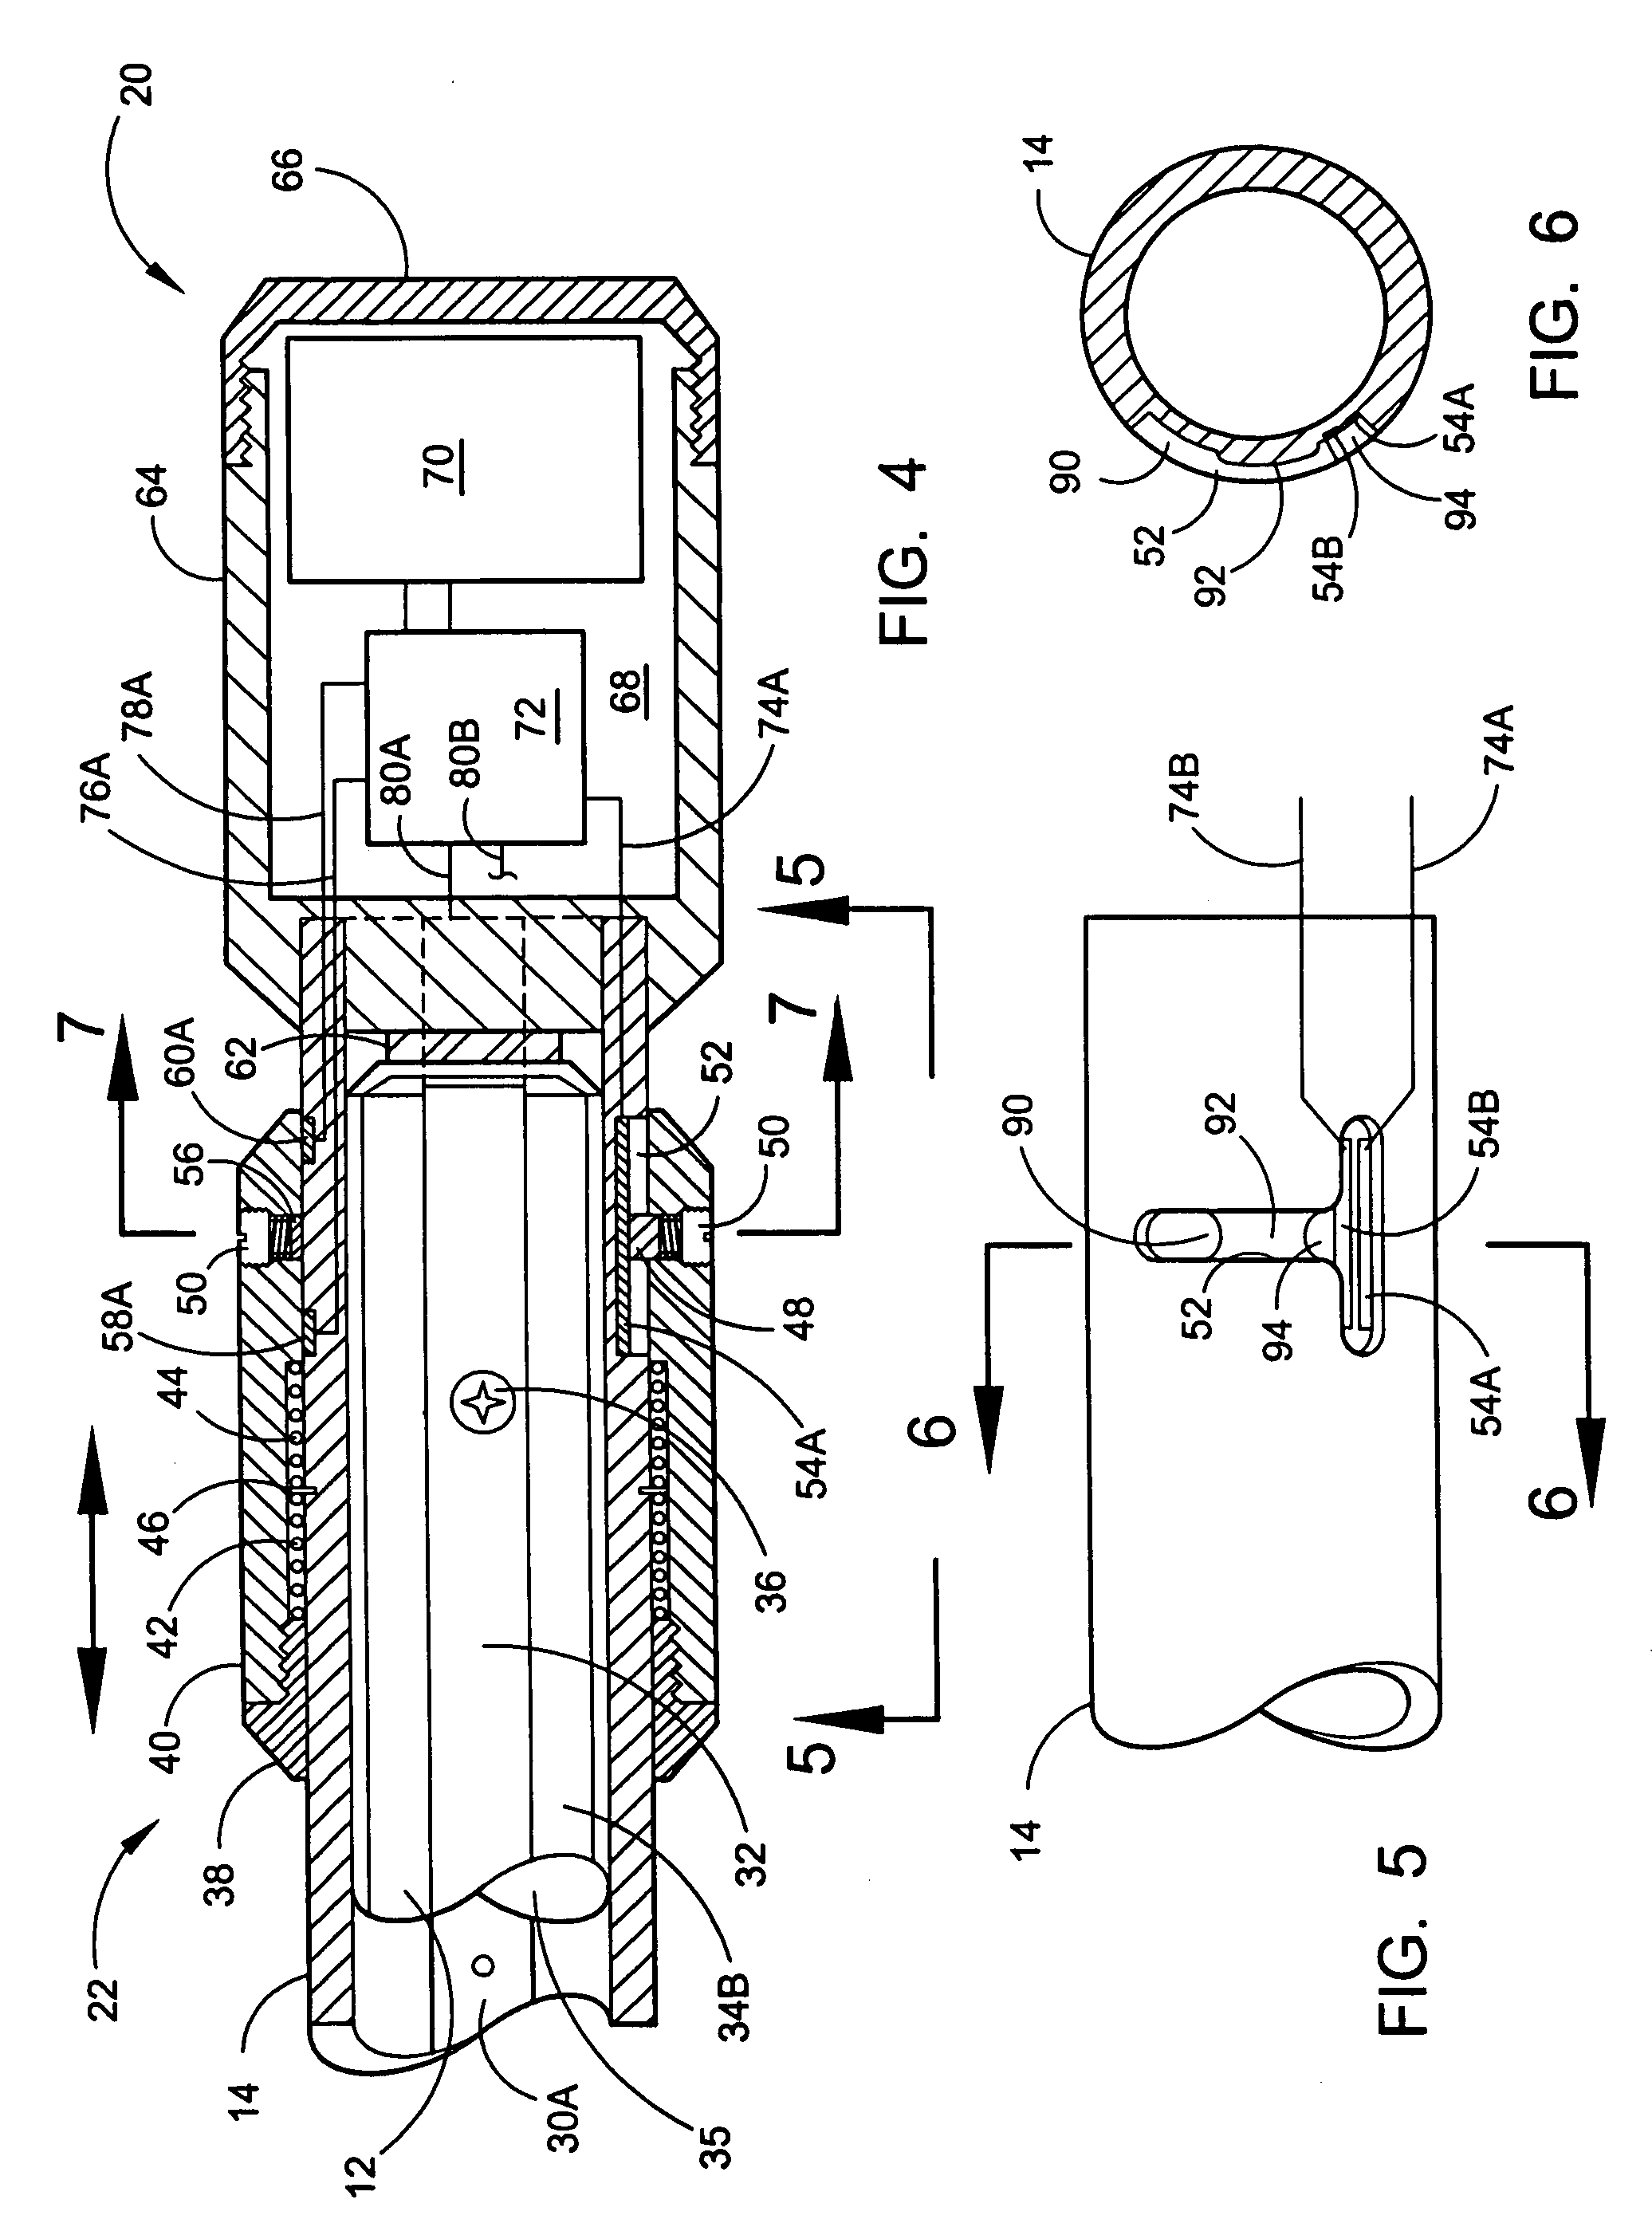 Extendable electronic immobilization staff